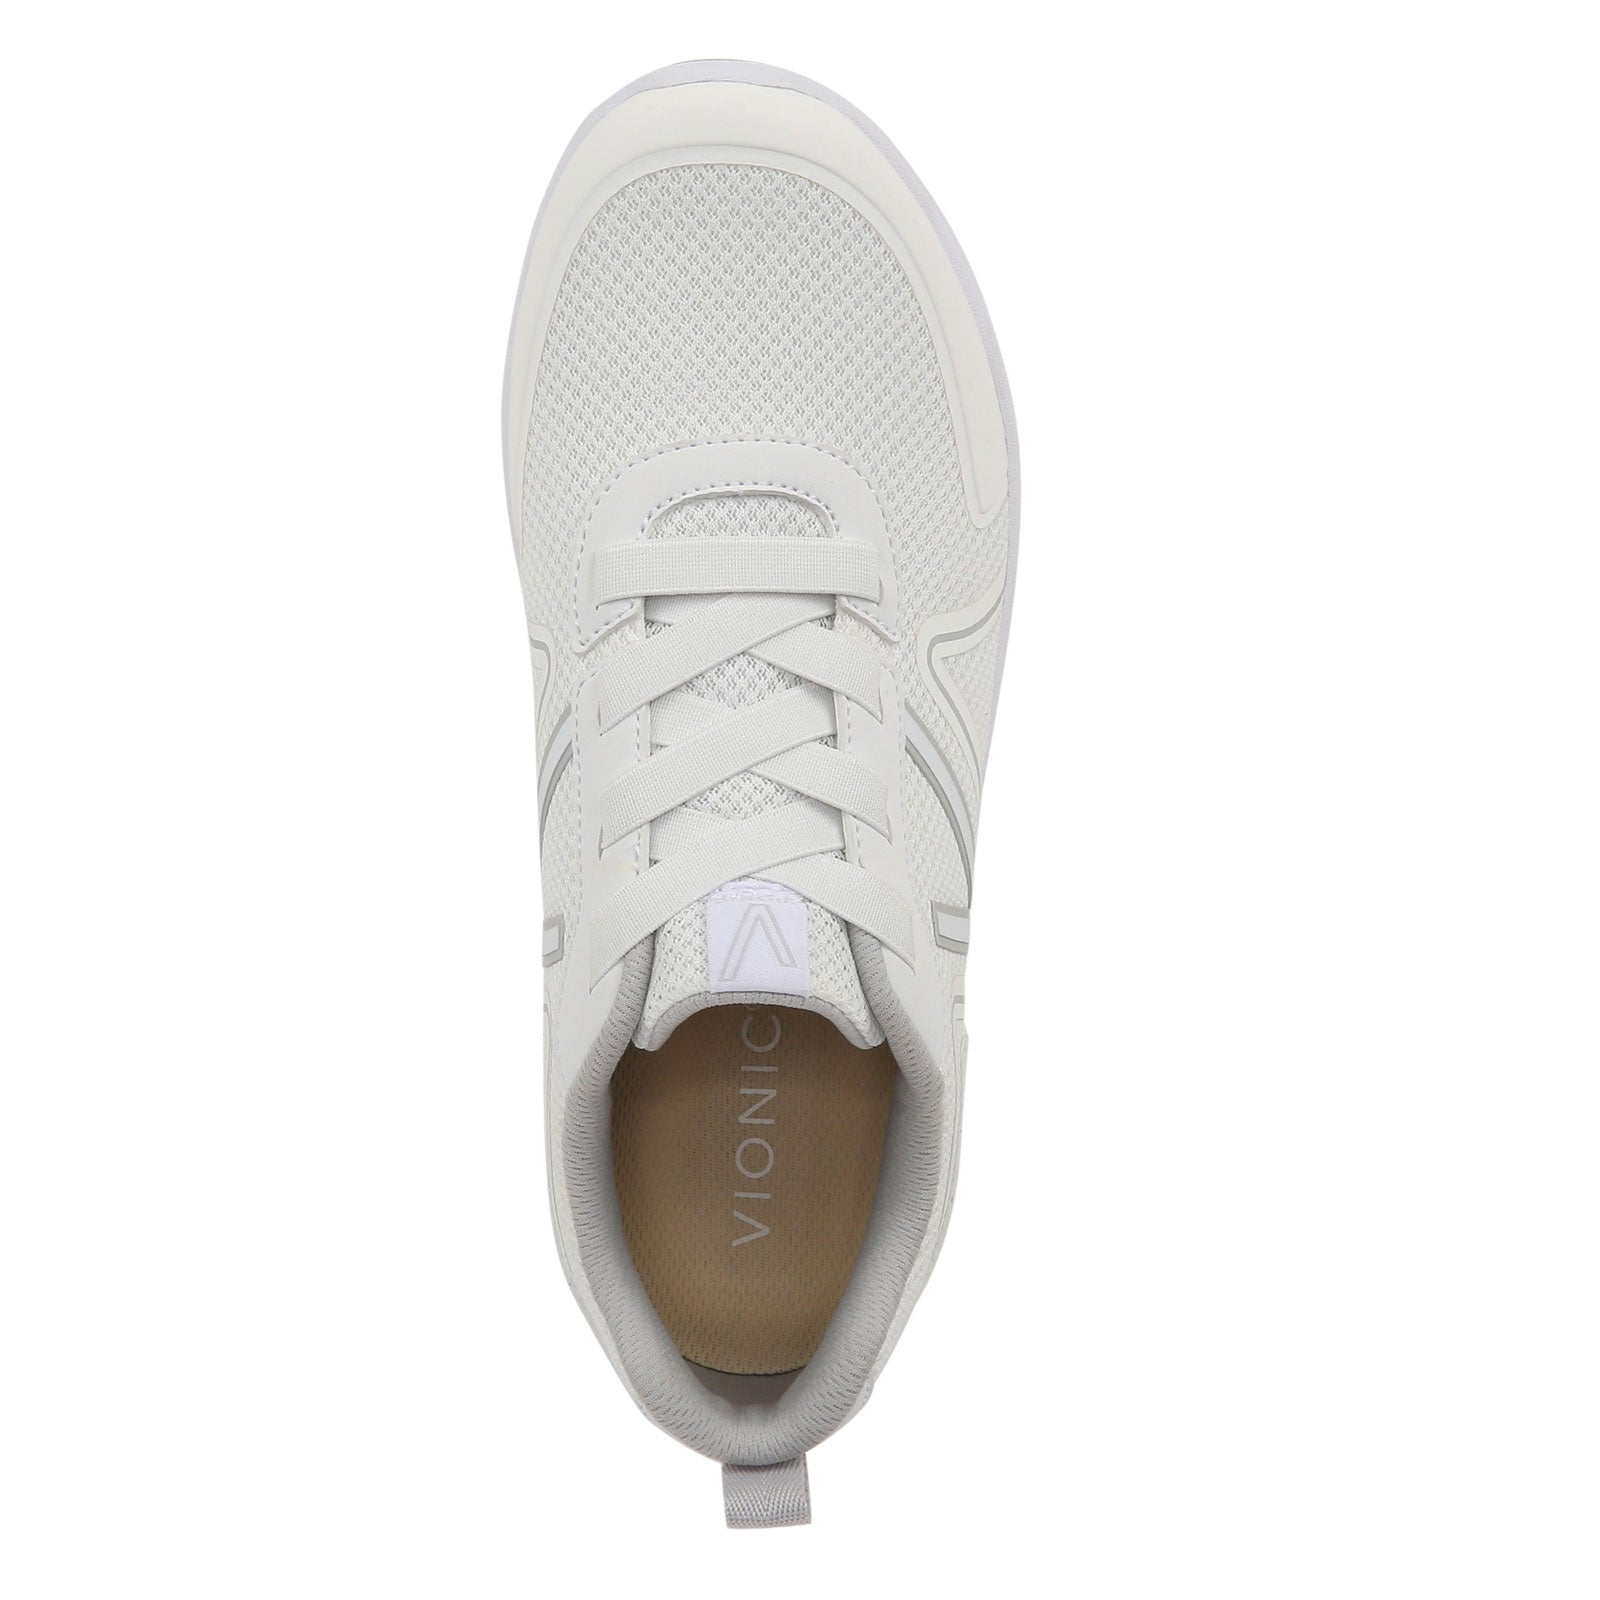 Team Trainer 92 Low - Mens Casual Lace-Up Sneaker - Nashville Shoe Warehouse